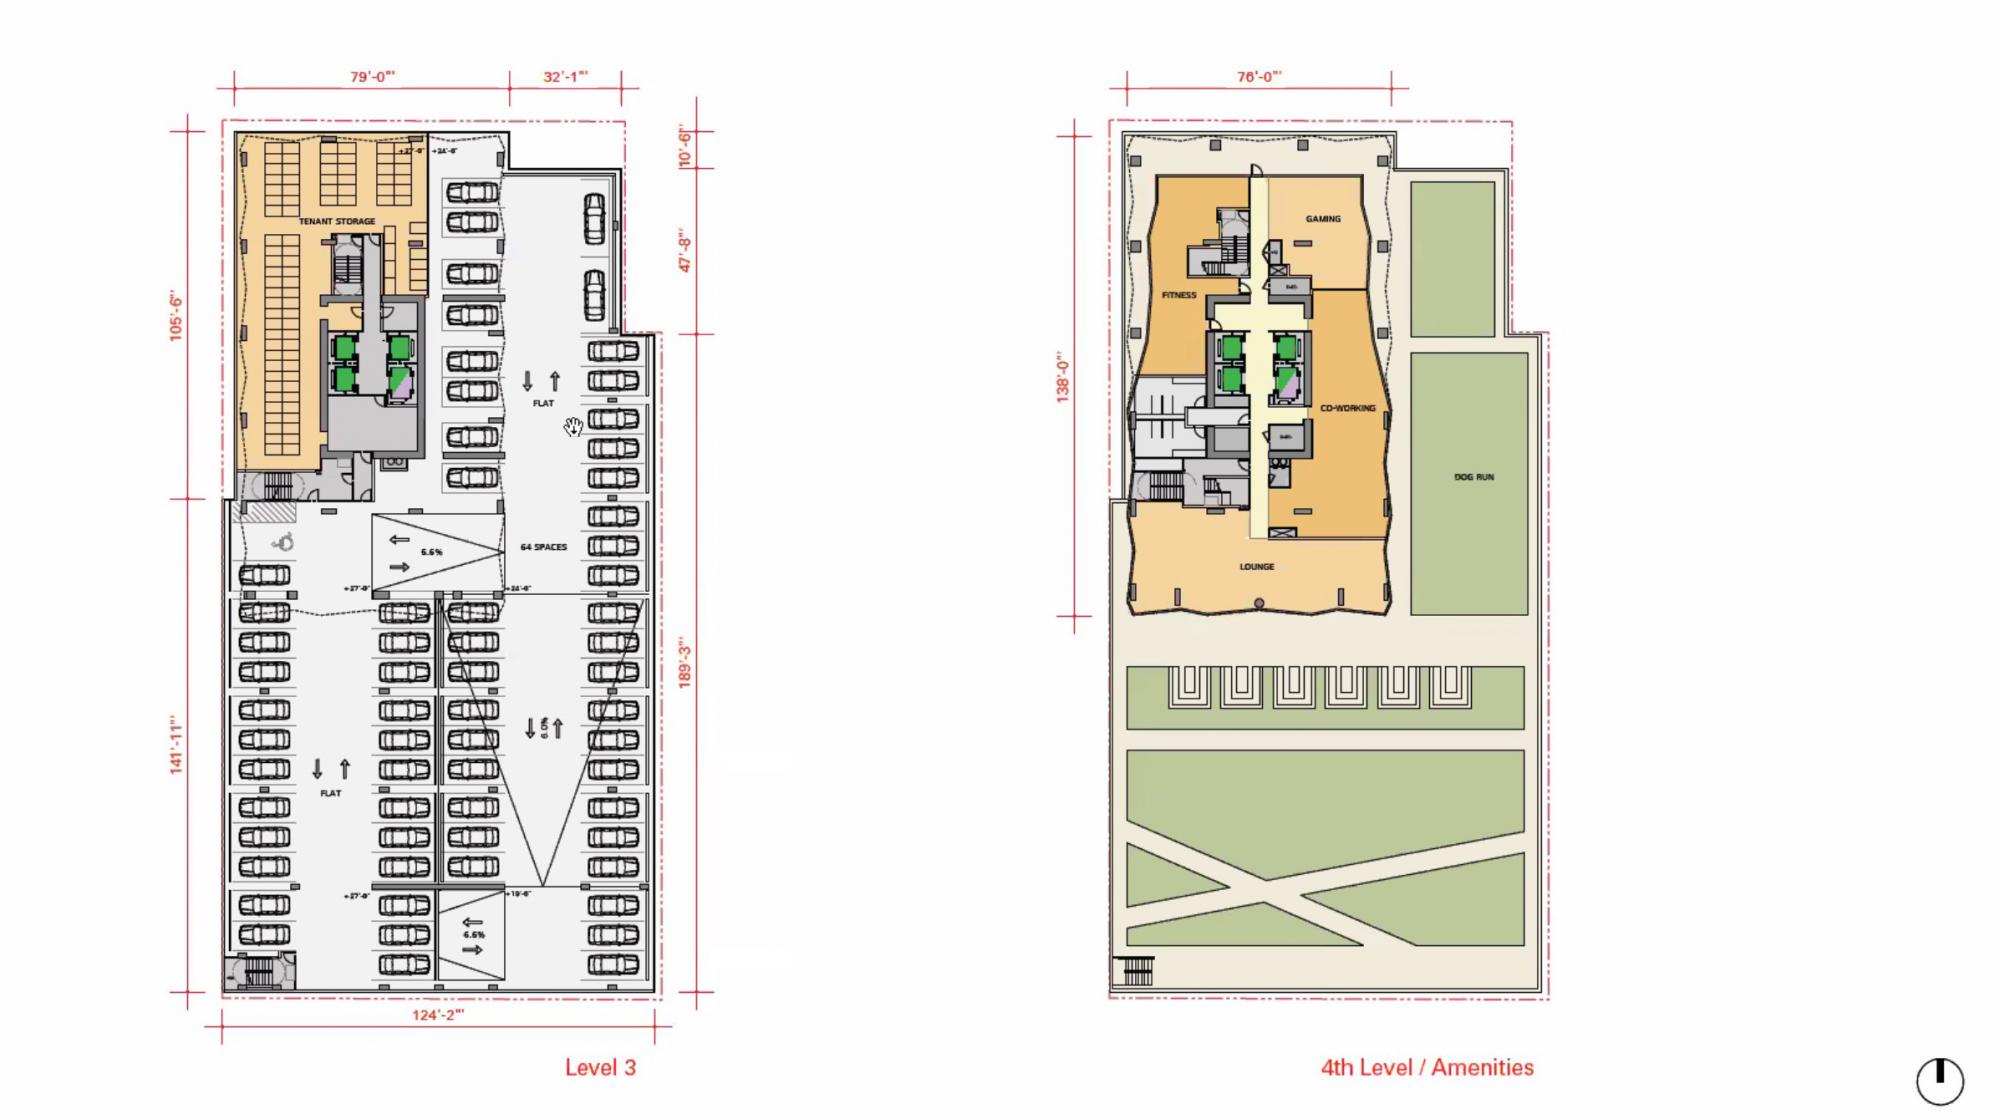 301 S State Street third and fourth floor plans